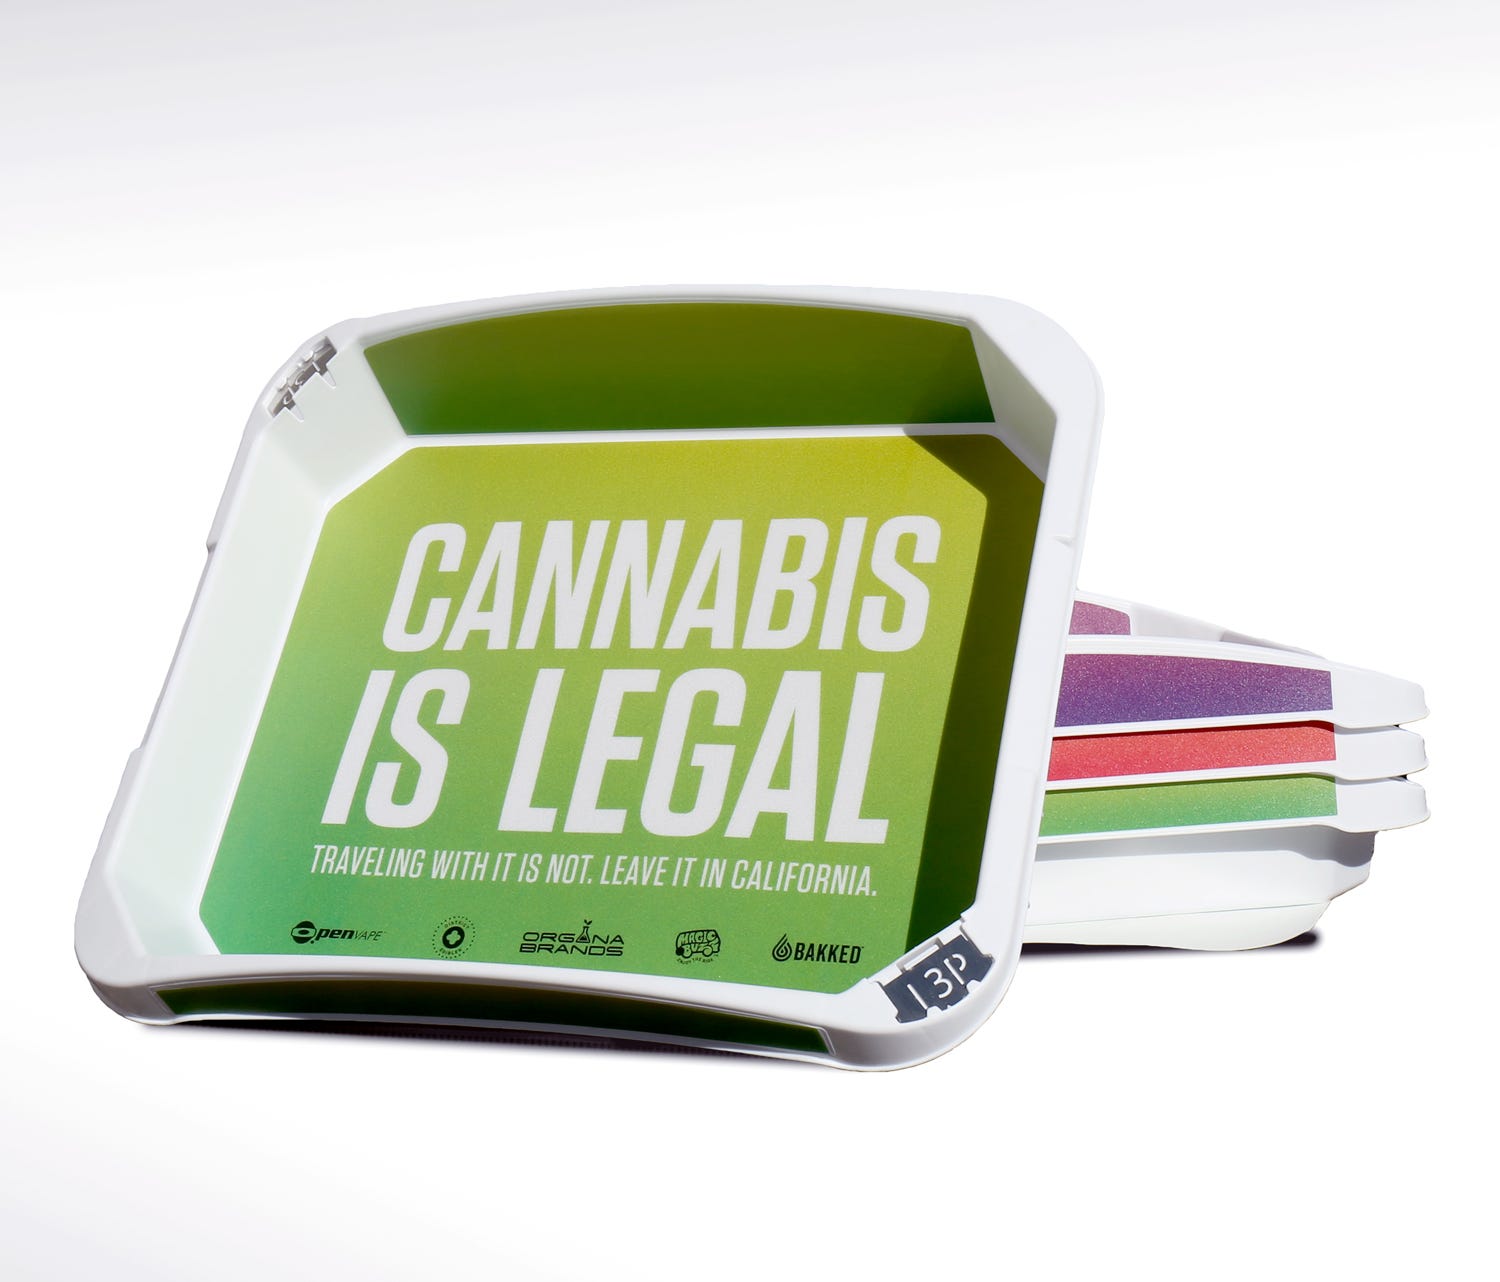 To alert fliers to the rules about traveling with recreational pot purchased legally in California — and to advertise their cannabis company — in November, Organa Brands ran an ad in the bottom of the bins at the security checkpoints at Ontario Inter